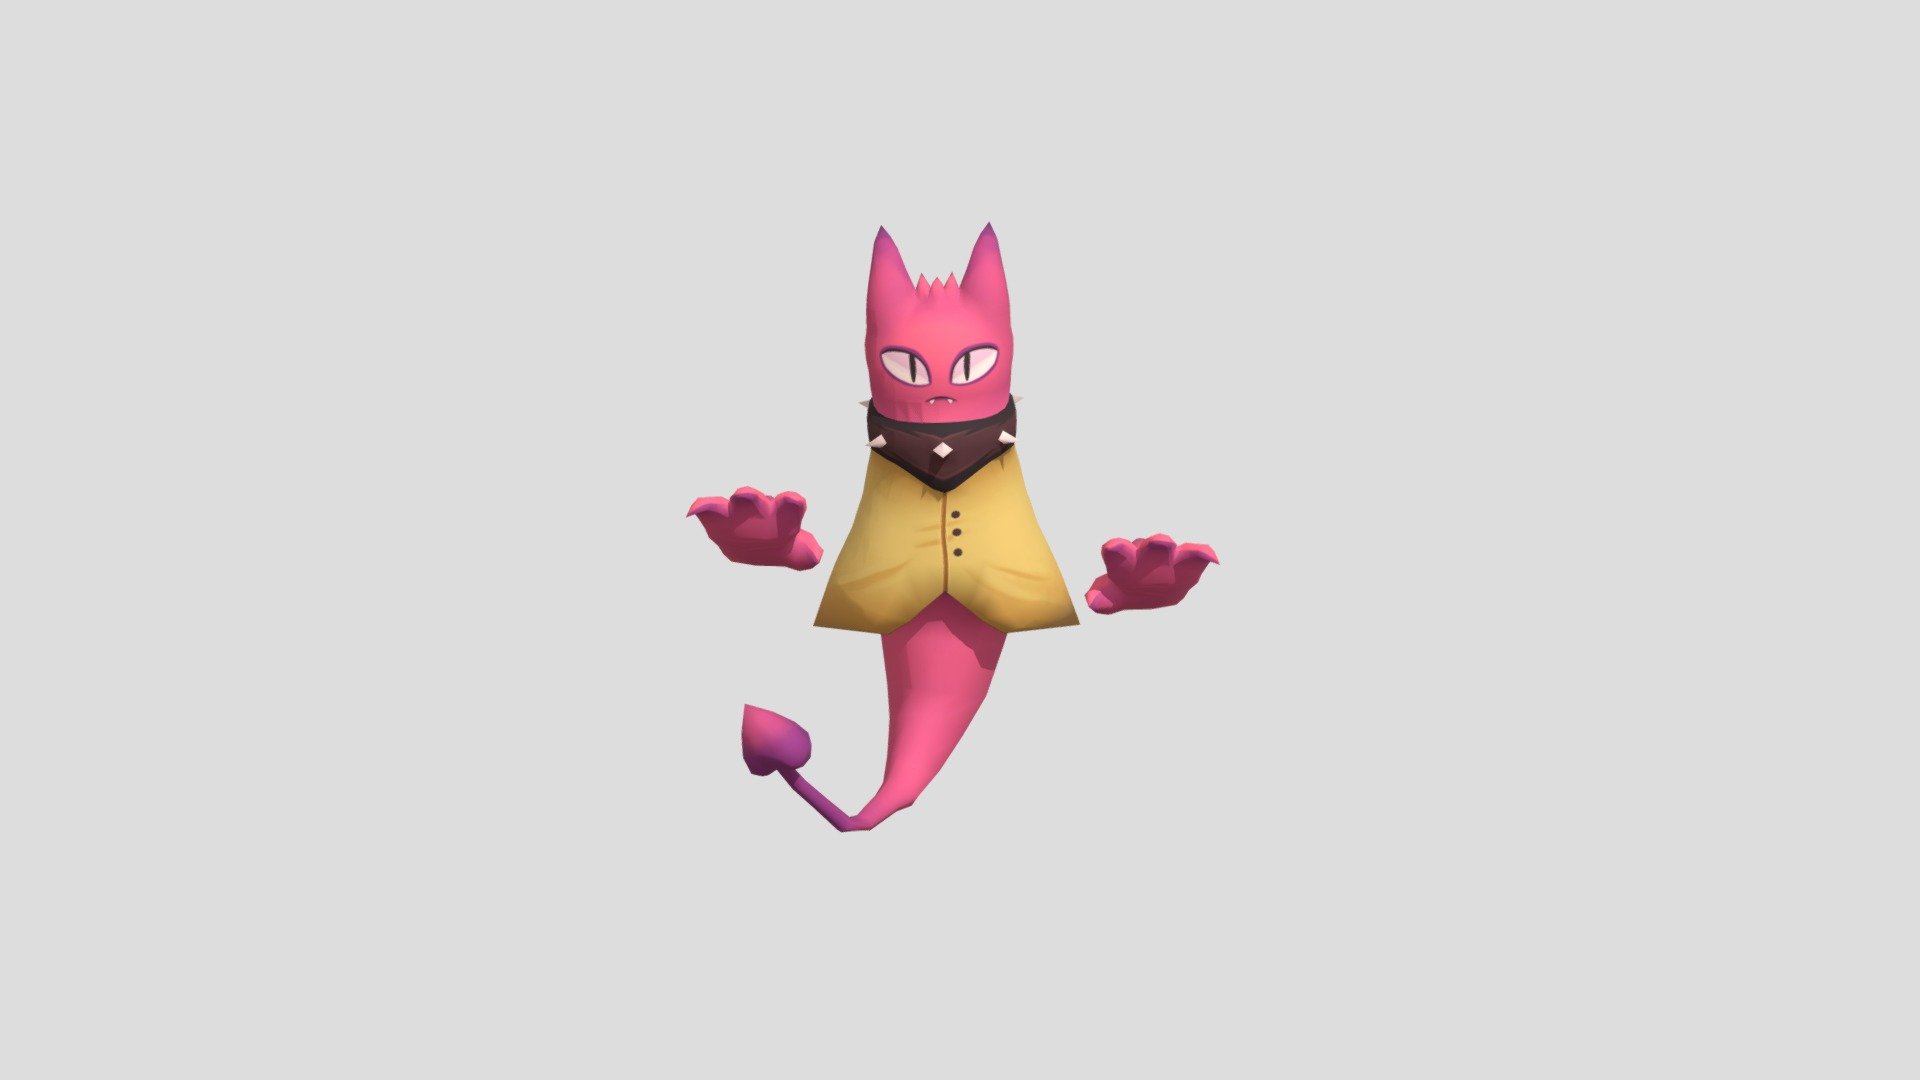 A cute little devil that is game ready and has 2 other evolutions. 



It has 1167 verts and 1860 tris. 



It has 6 different materials:

* - Pink

* - Red

* - Blue

* - Green

* - White

* - Black



And 8 different animations:

* - Idle

* - Walk

* - Run

*  - Jump

* - Melee Attack

* - Distance Attack

* - Get Hit

* - Die

 - Little Toon Monster - Cute Devil - Evolution 2 - Buy Royalty Free 3D model by EpiXR Games (@epixrgames) 3d model